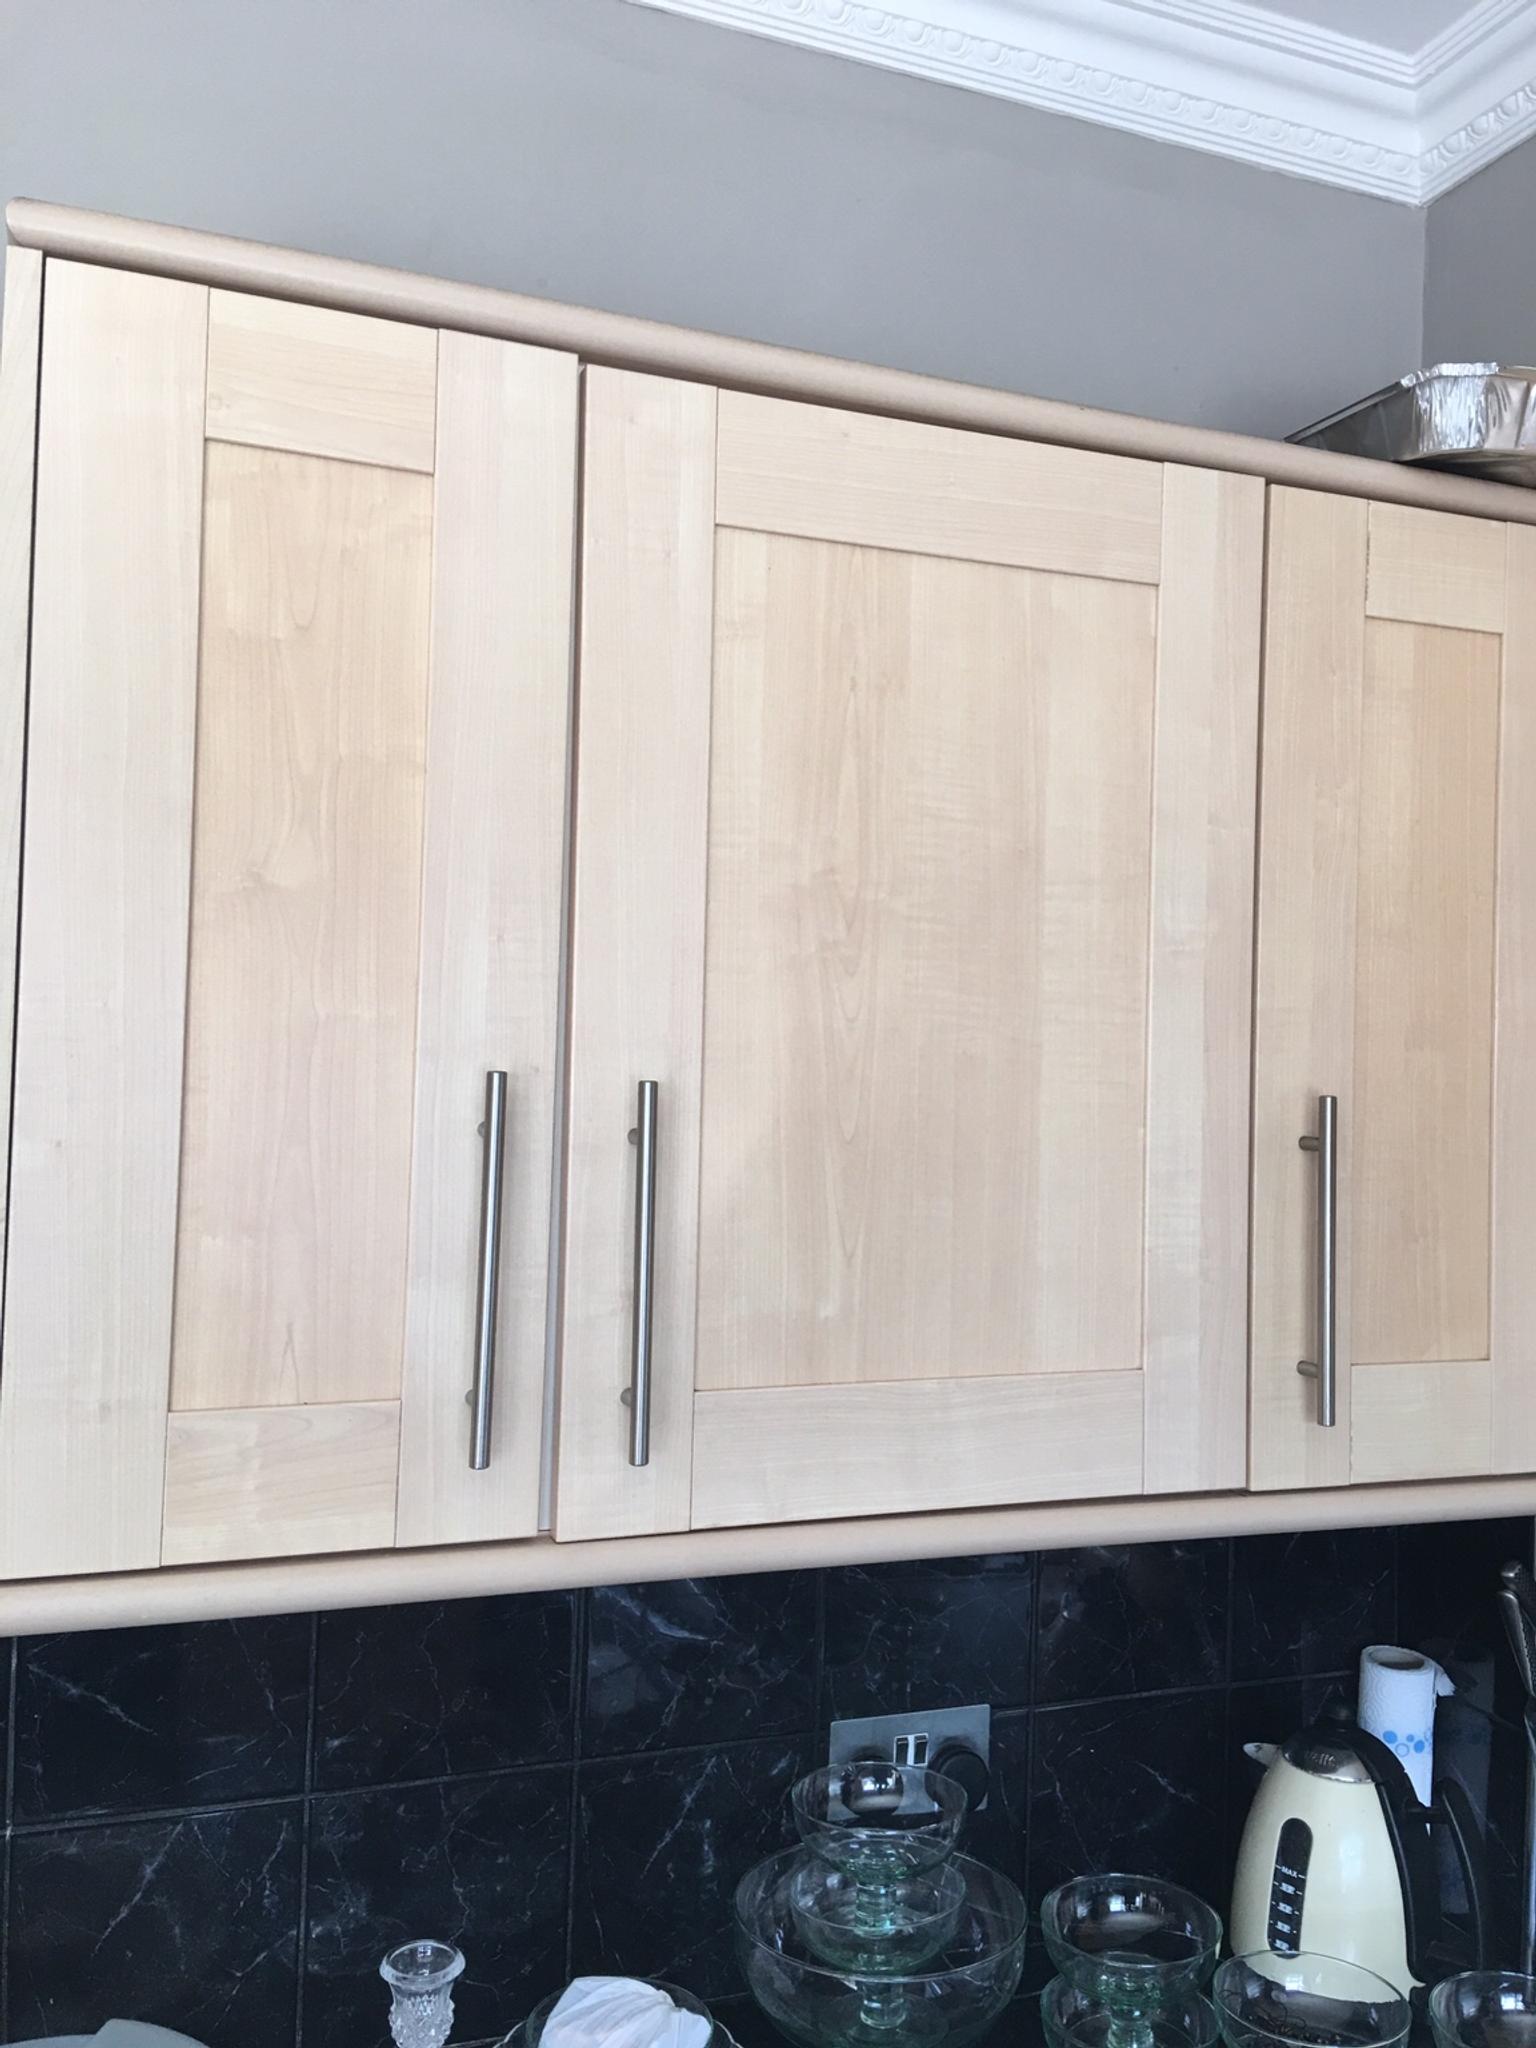 Light Beach Kitchen Cabinet Doors Free In Ig3 London For Free